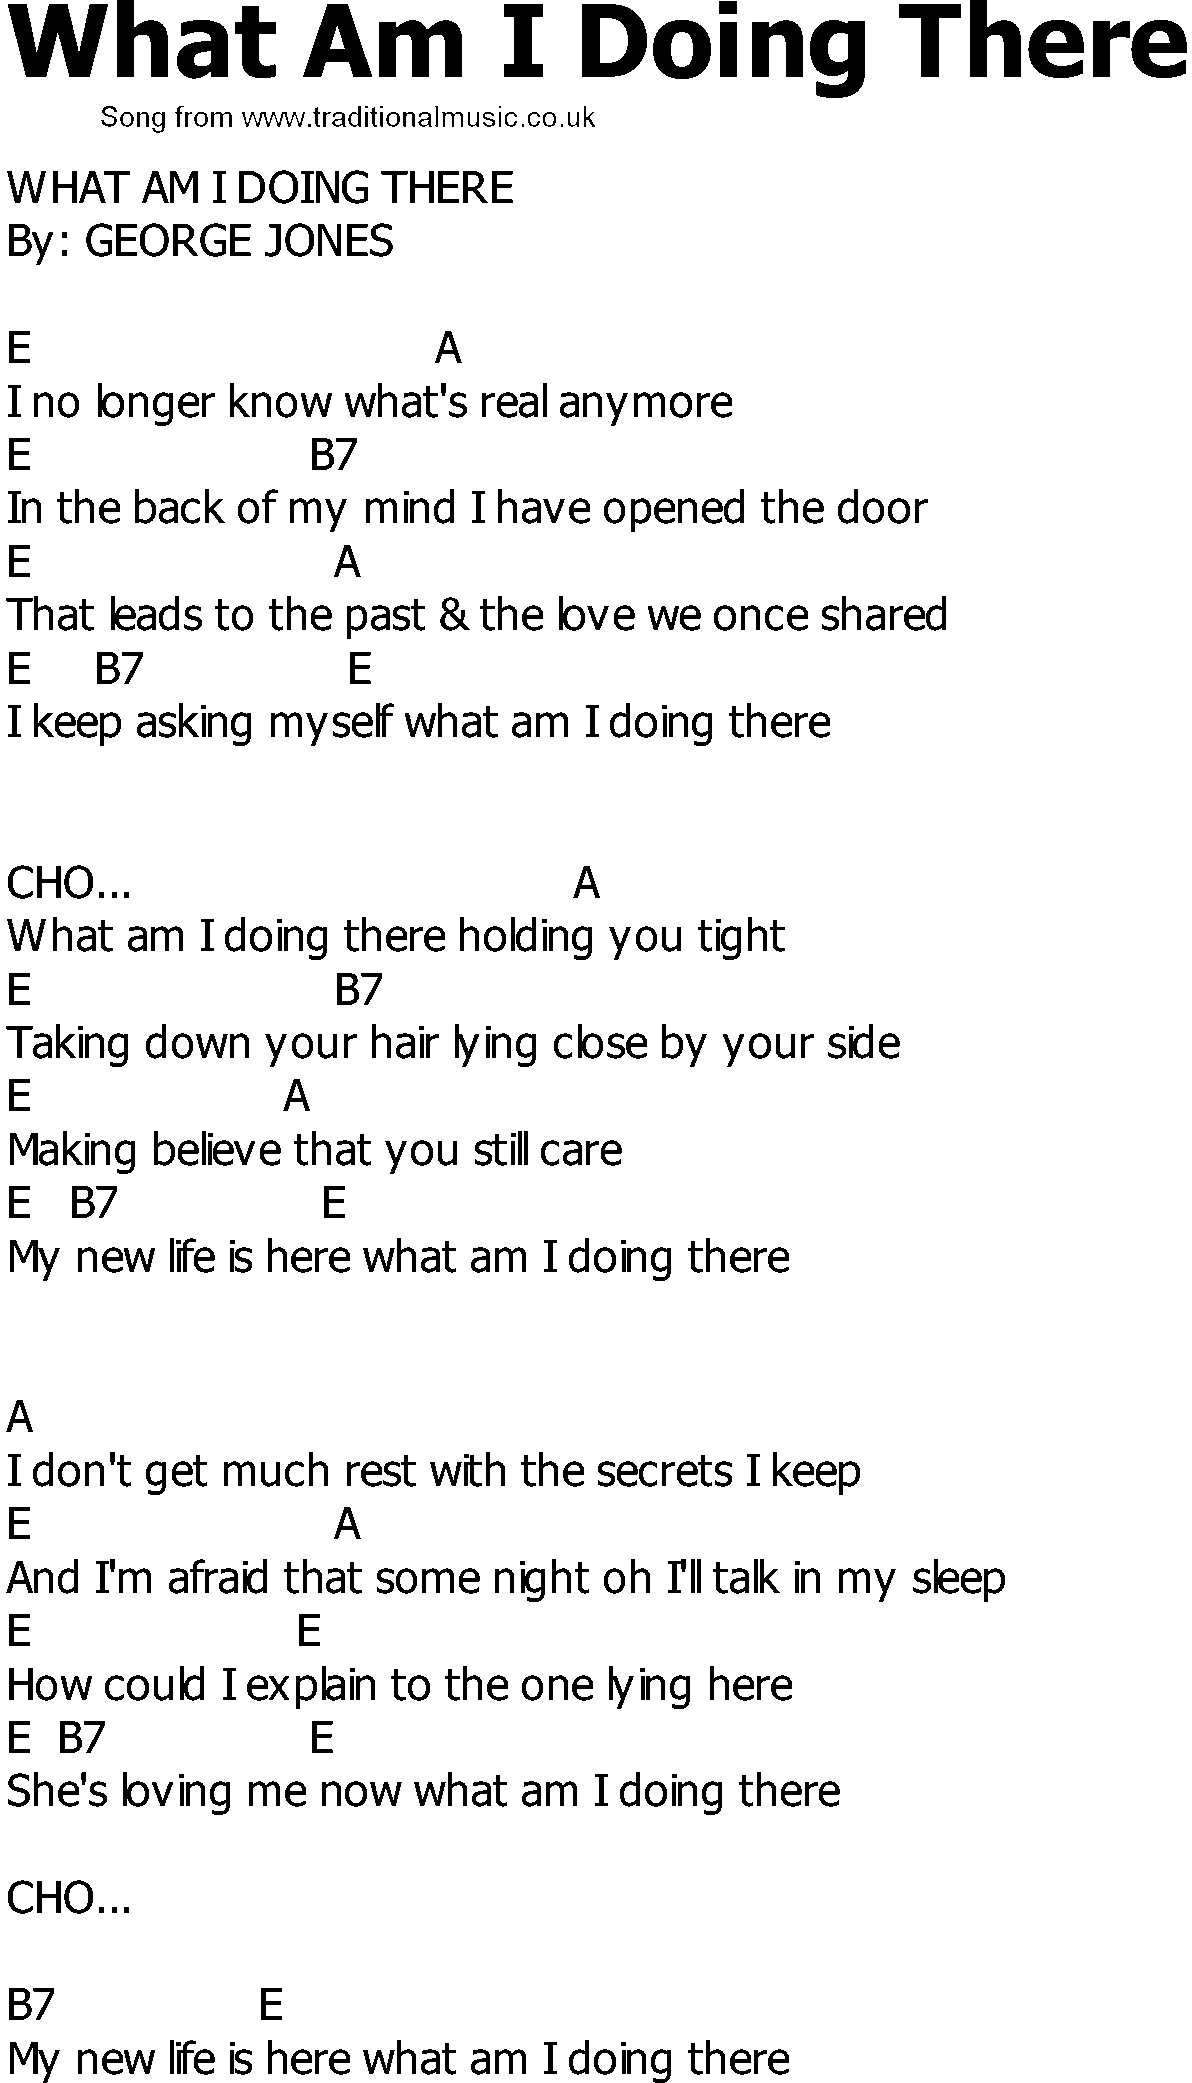 Old Country song lyrics with chords - What Am I Doing There